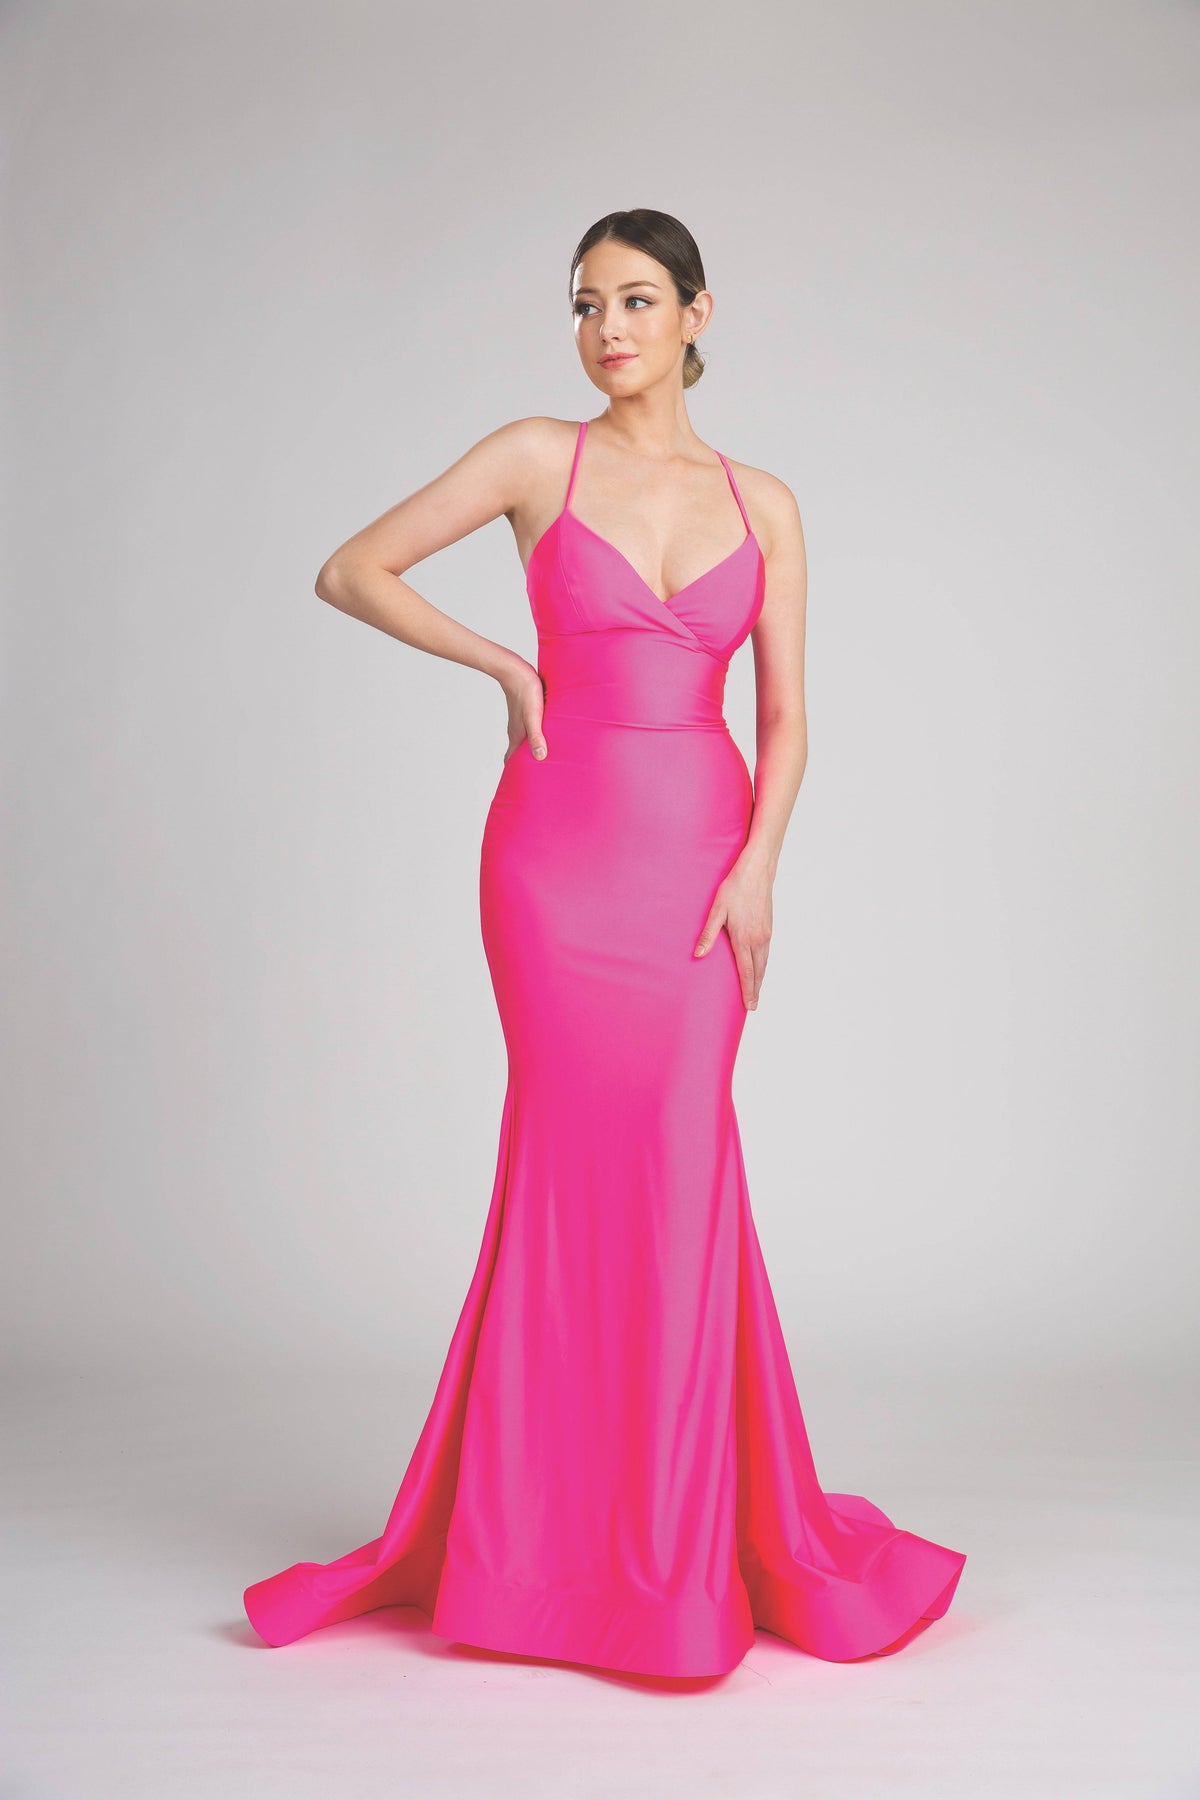 Fiesta 40190 Fitted Mermaid Gown - NORMA REED